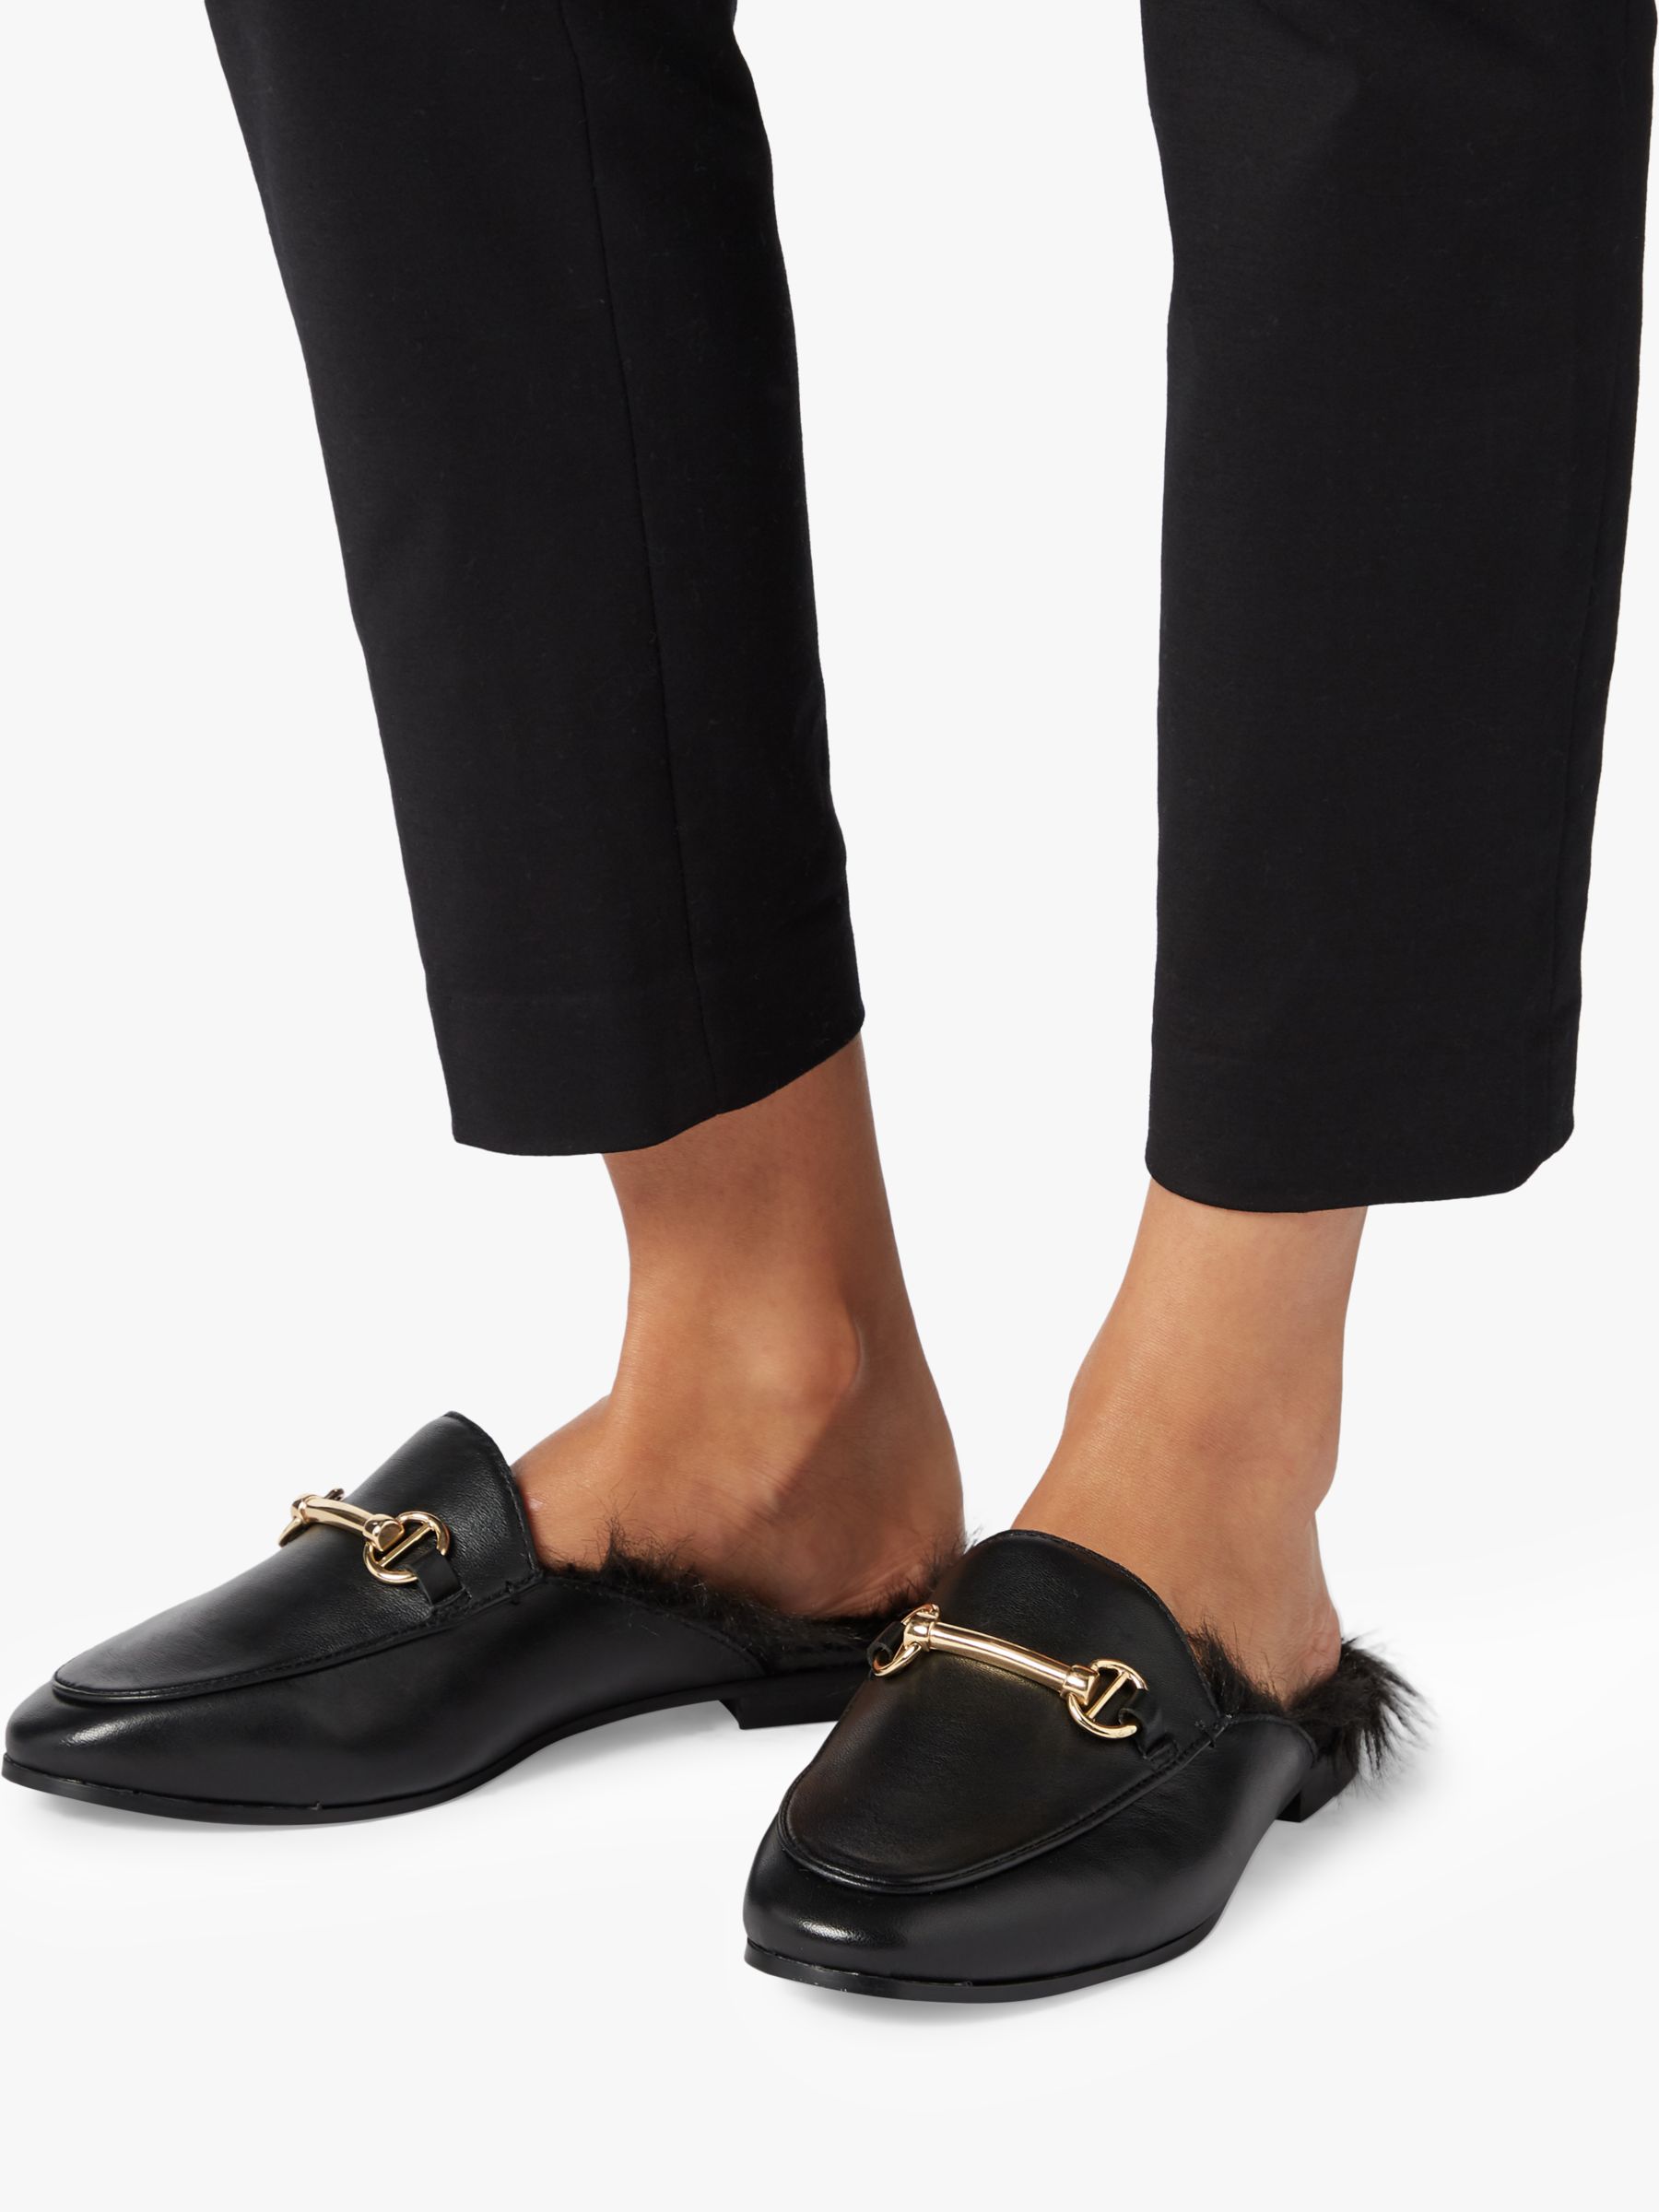 dune fur loafers